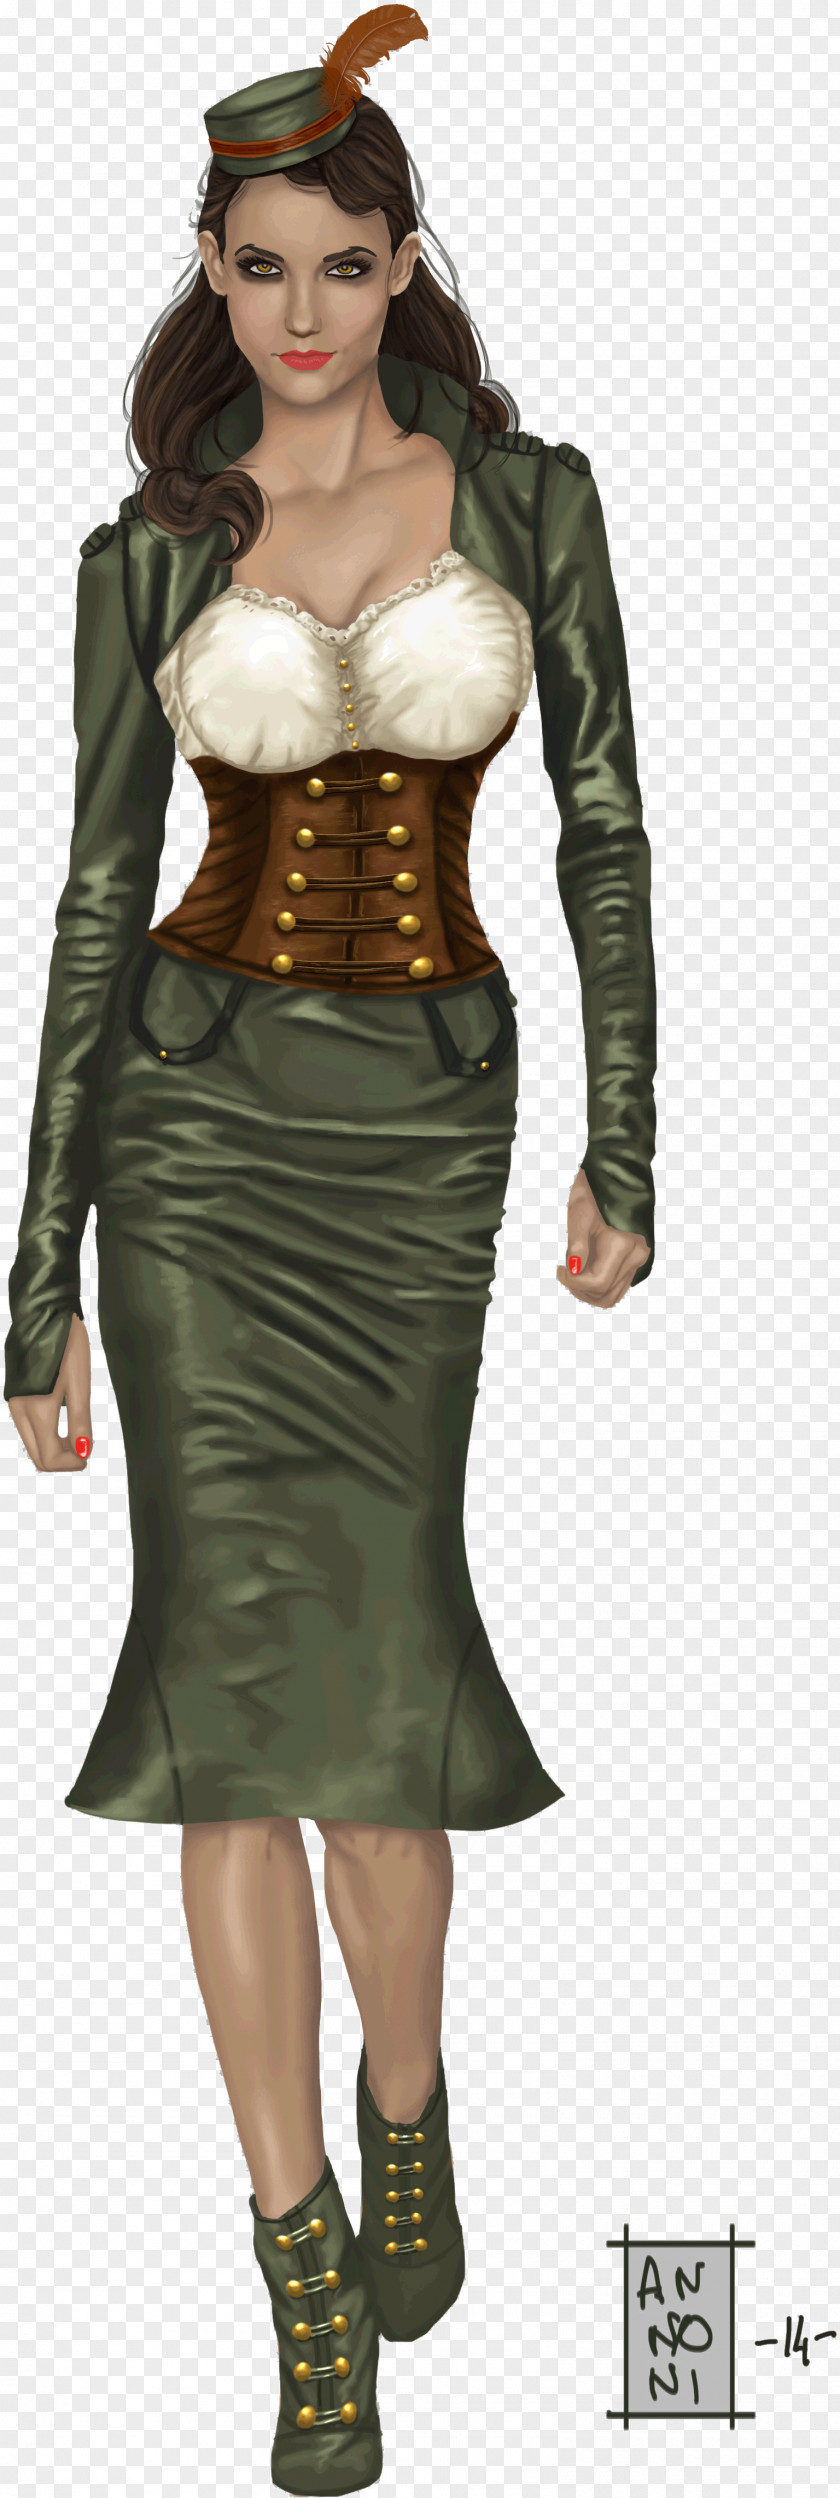 Corset Role-playing Game Dress Woman PNG